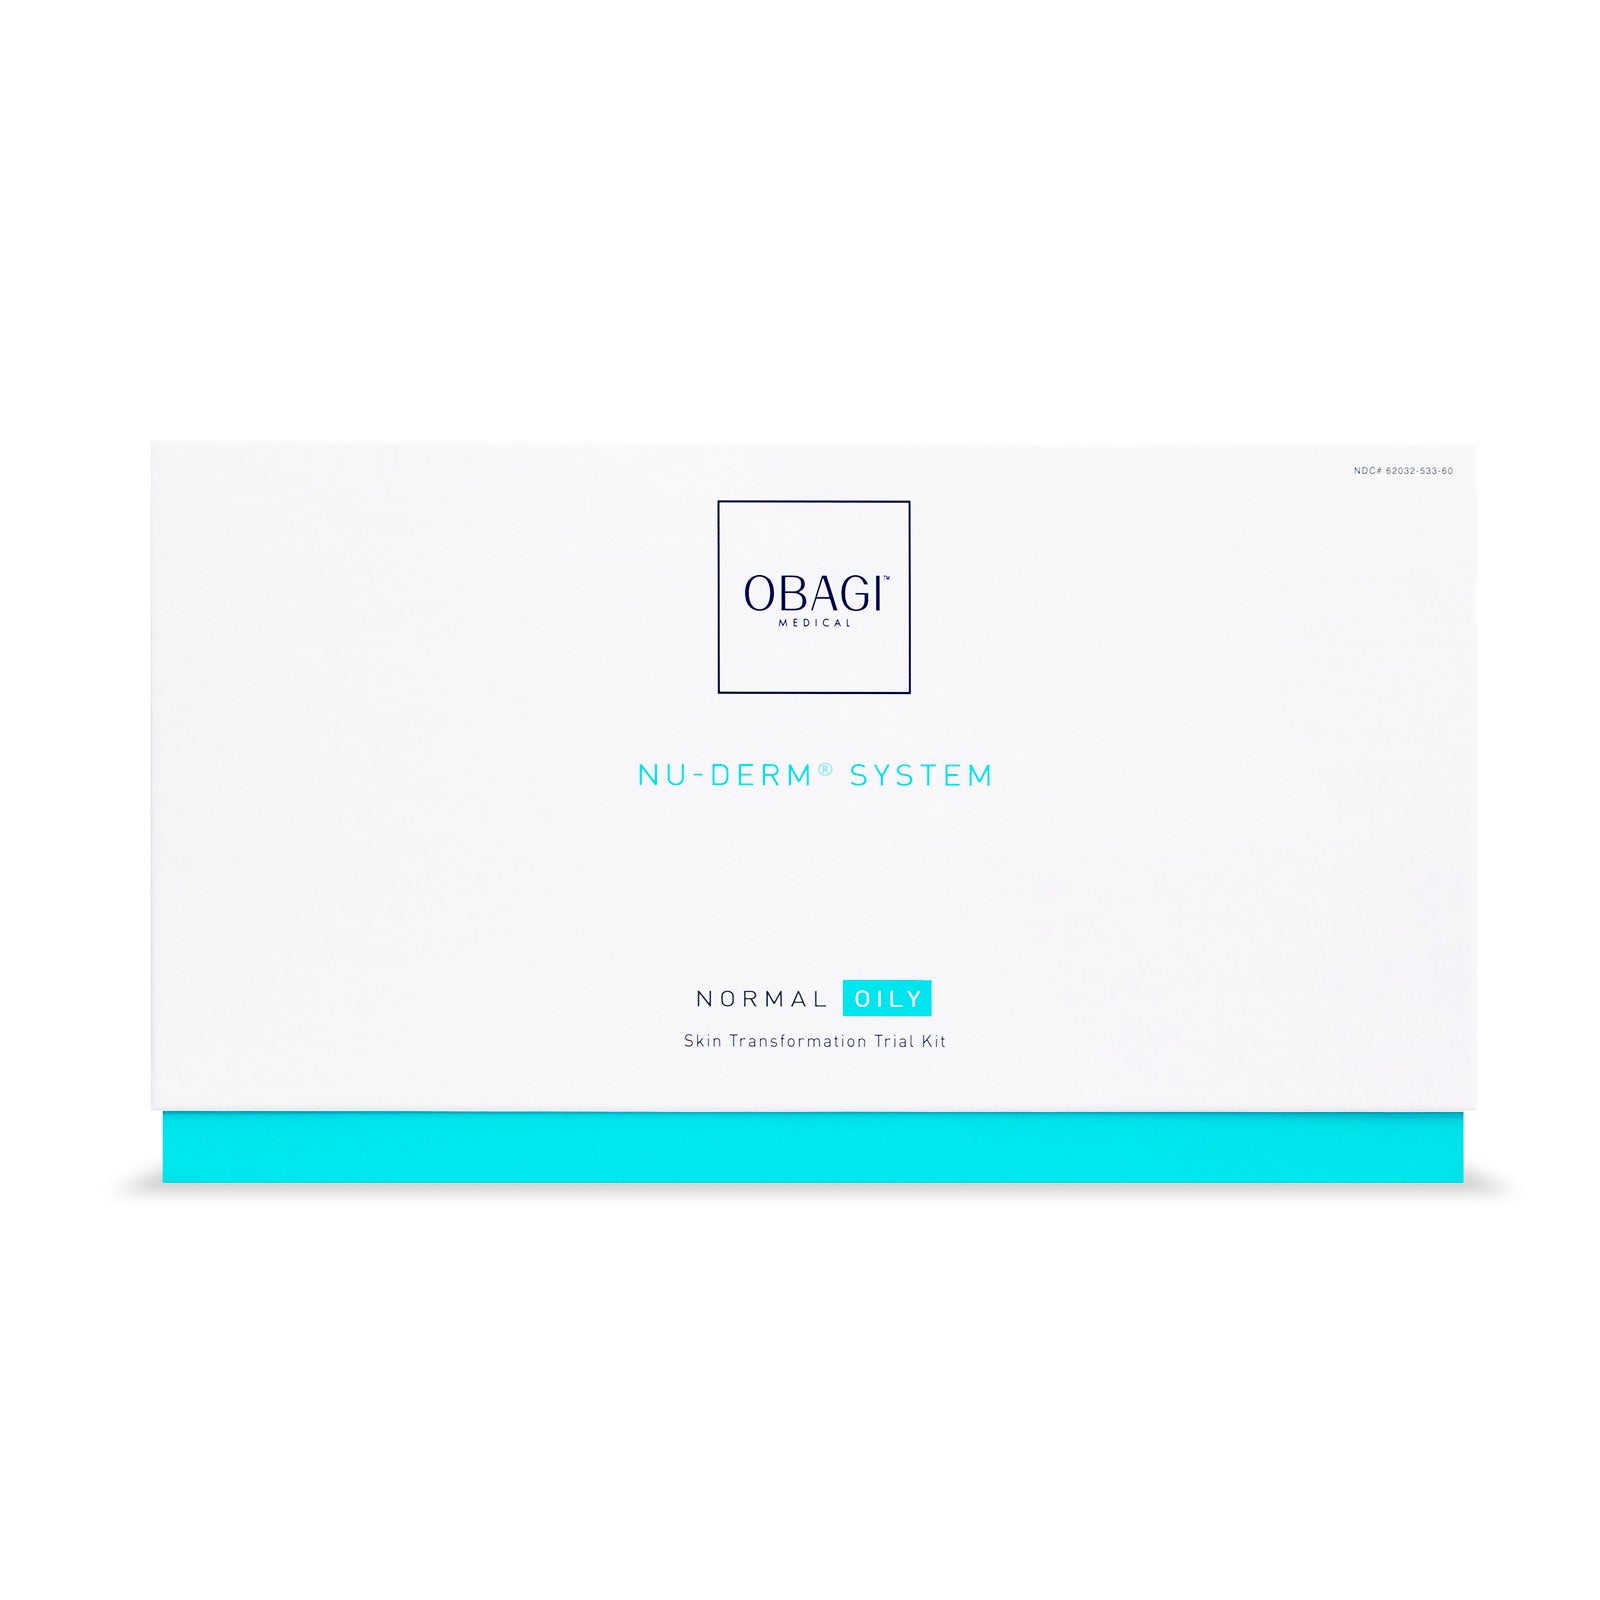 Obagi Nu-Derm Trial Kit Norm-Oily - trial kit for normal to oily skin types - Beauty By Vianna